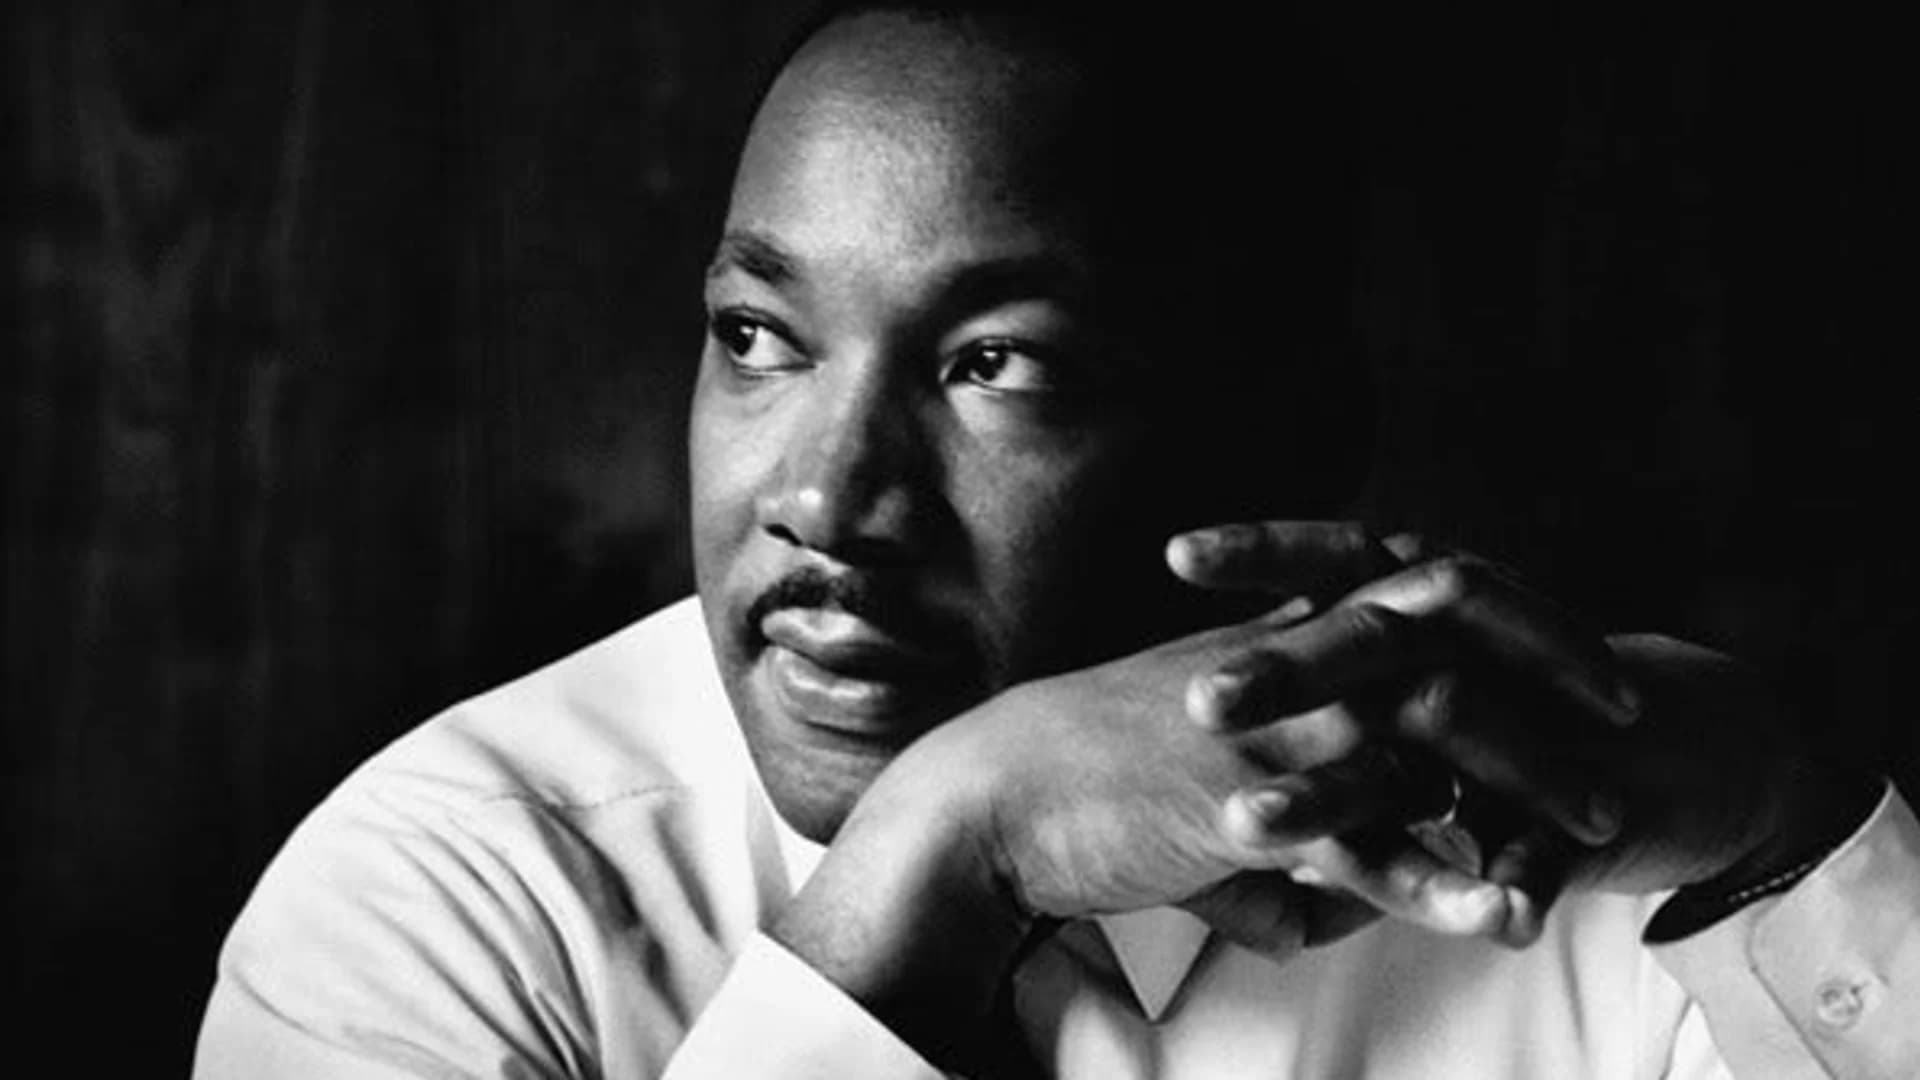 #N12BX:  Martin Luther King Jr. assassinated 50 years ago today